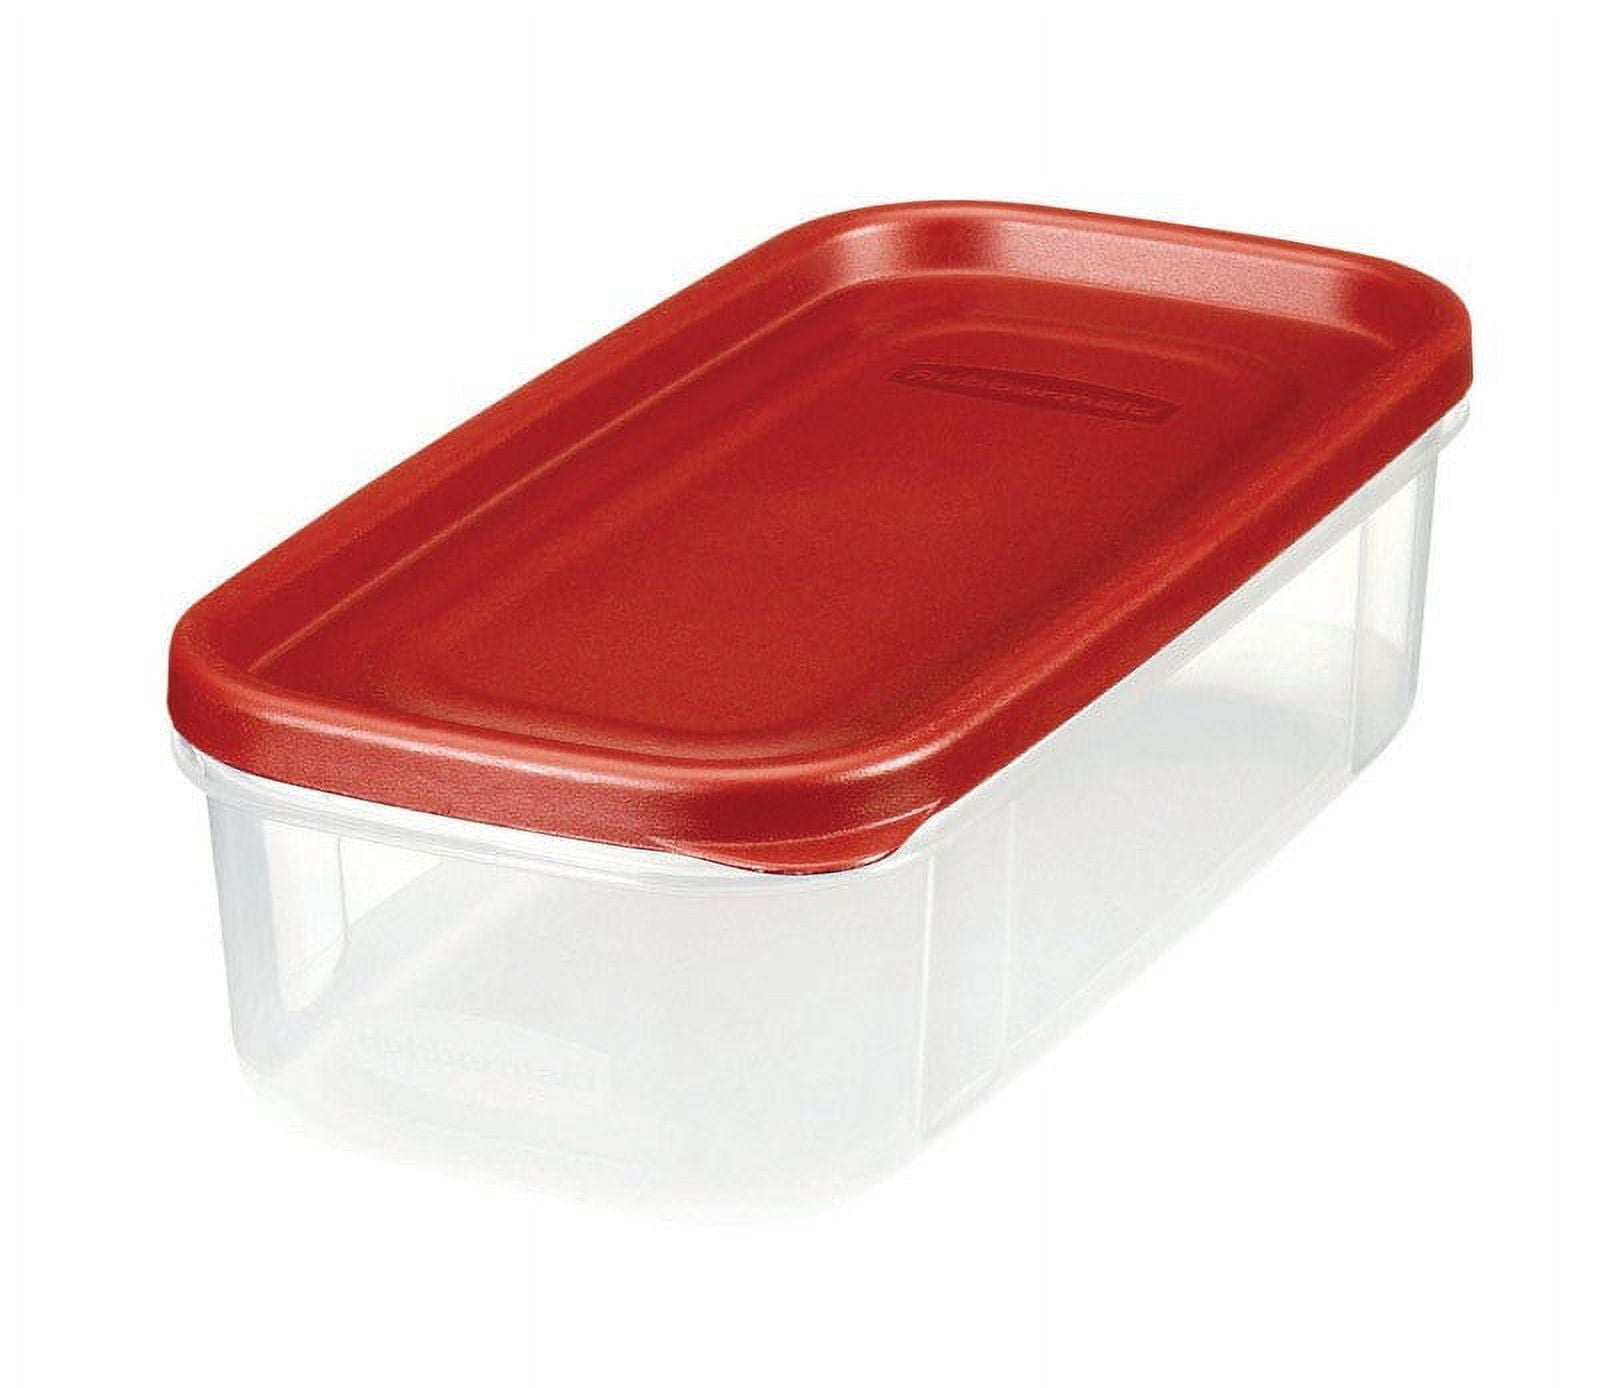 Rubbermaid 5 Cup Food Container